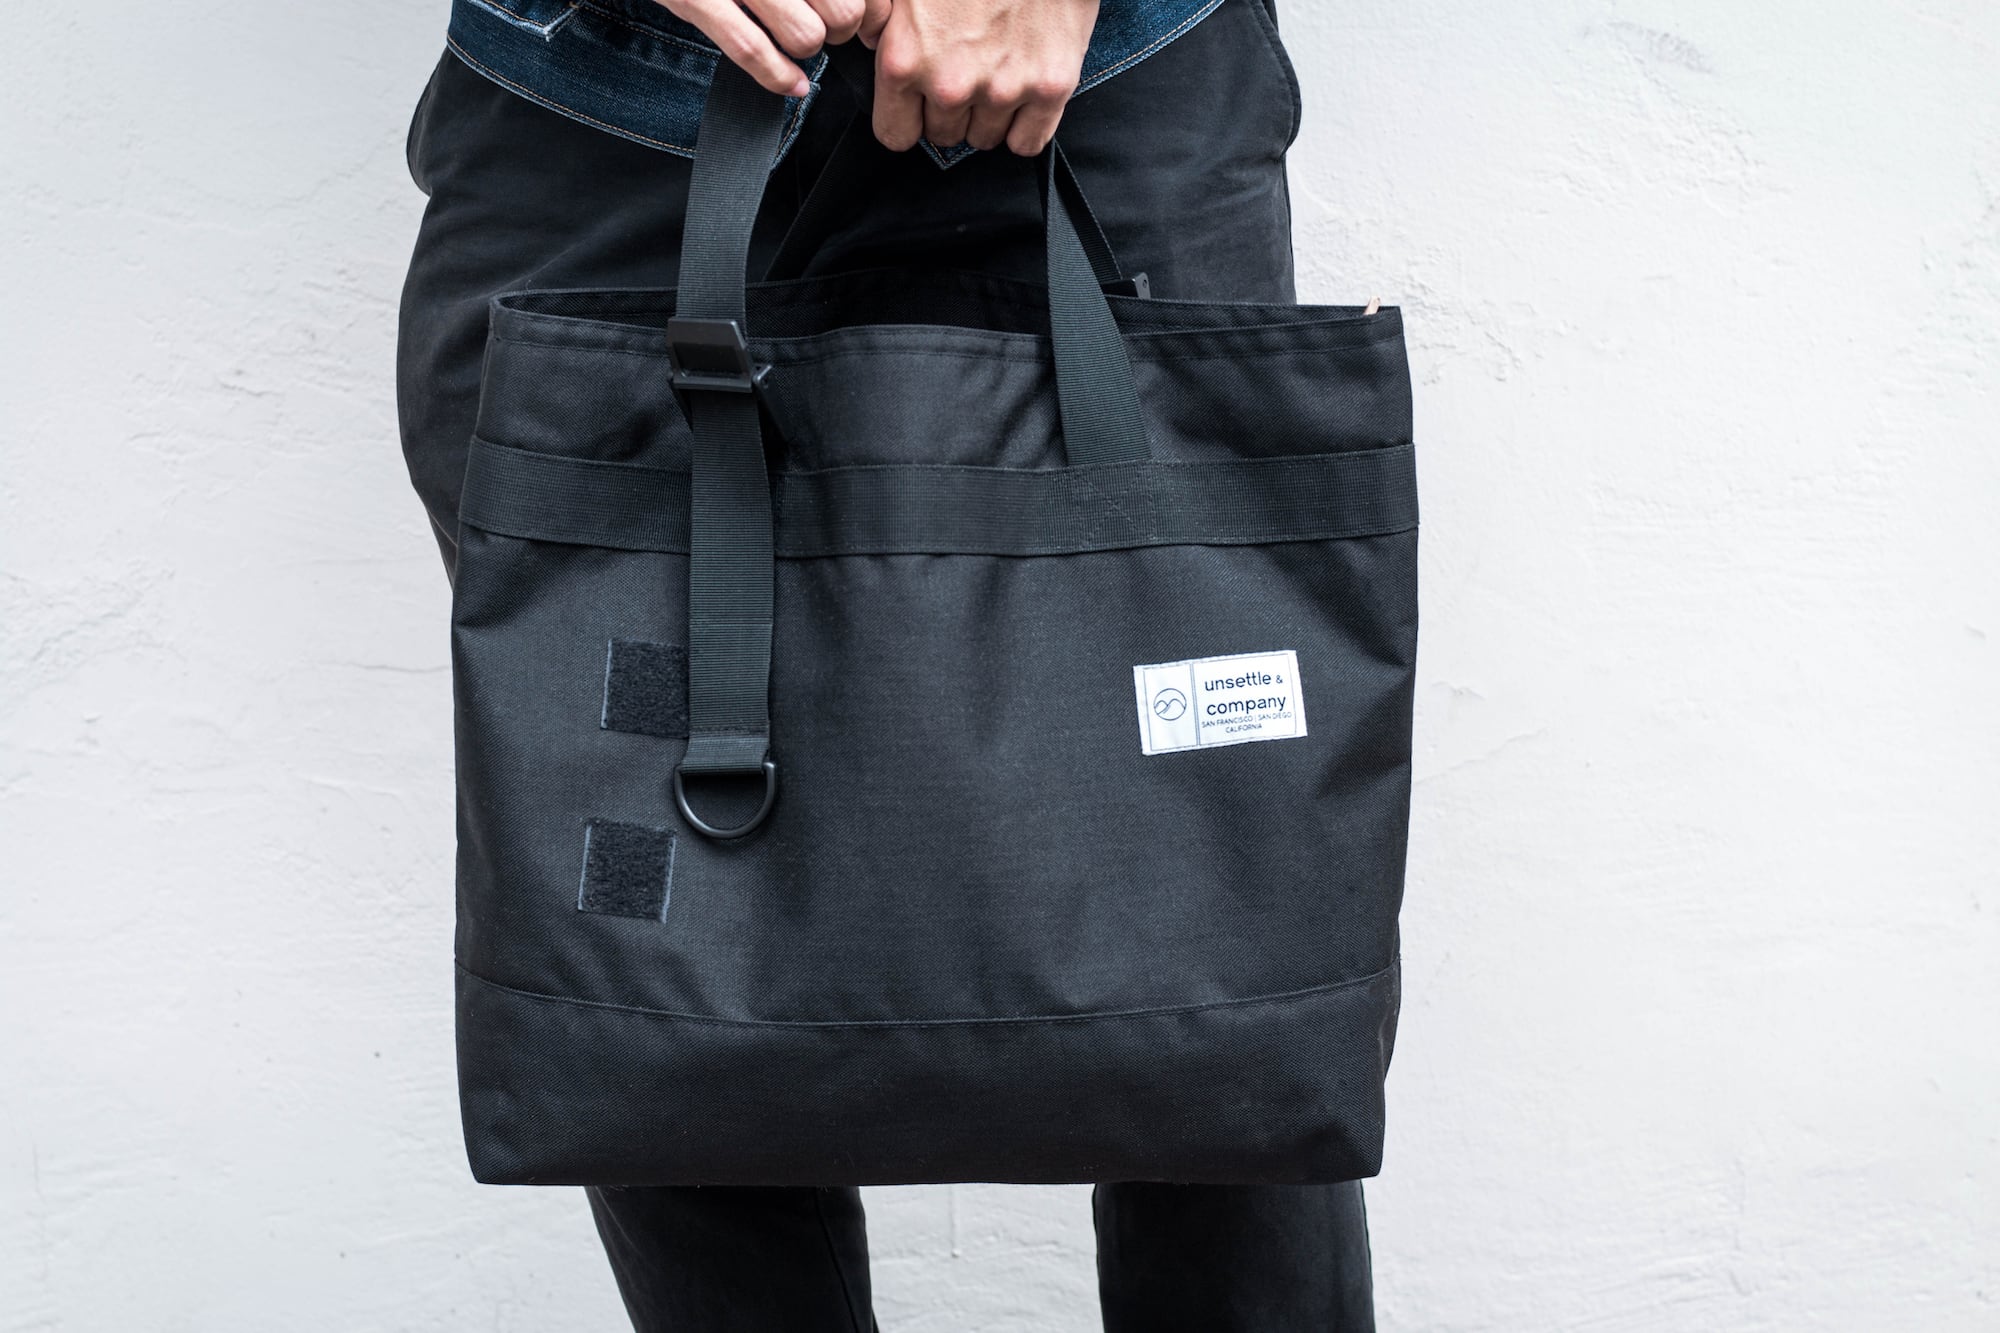 commuter tote bag lifestyle 4